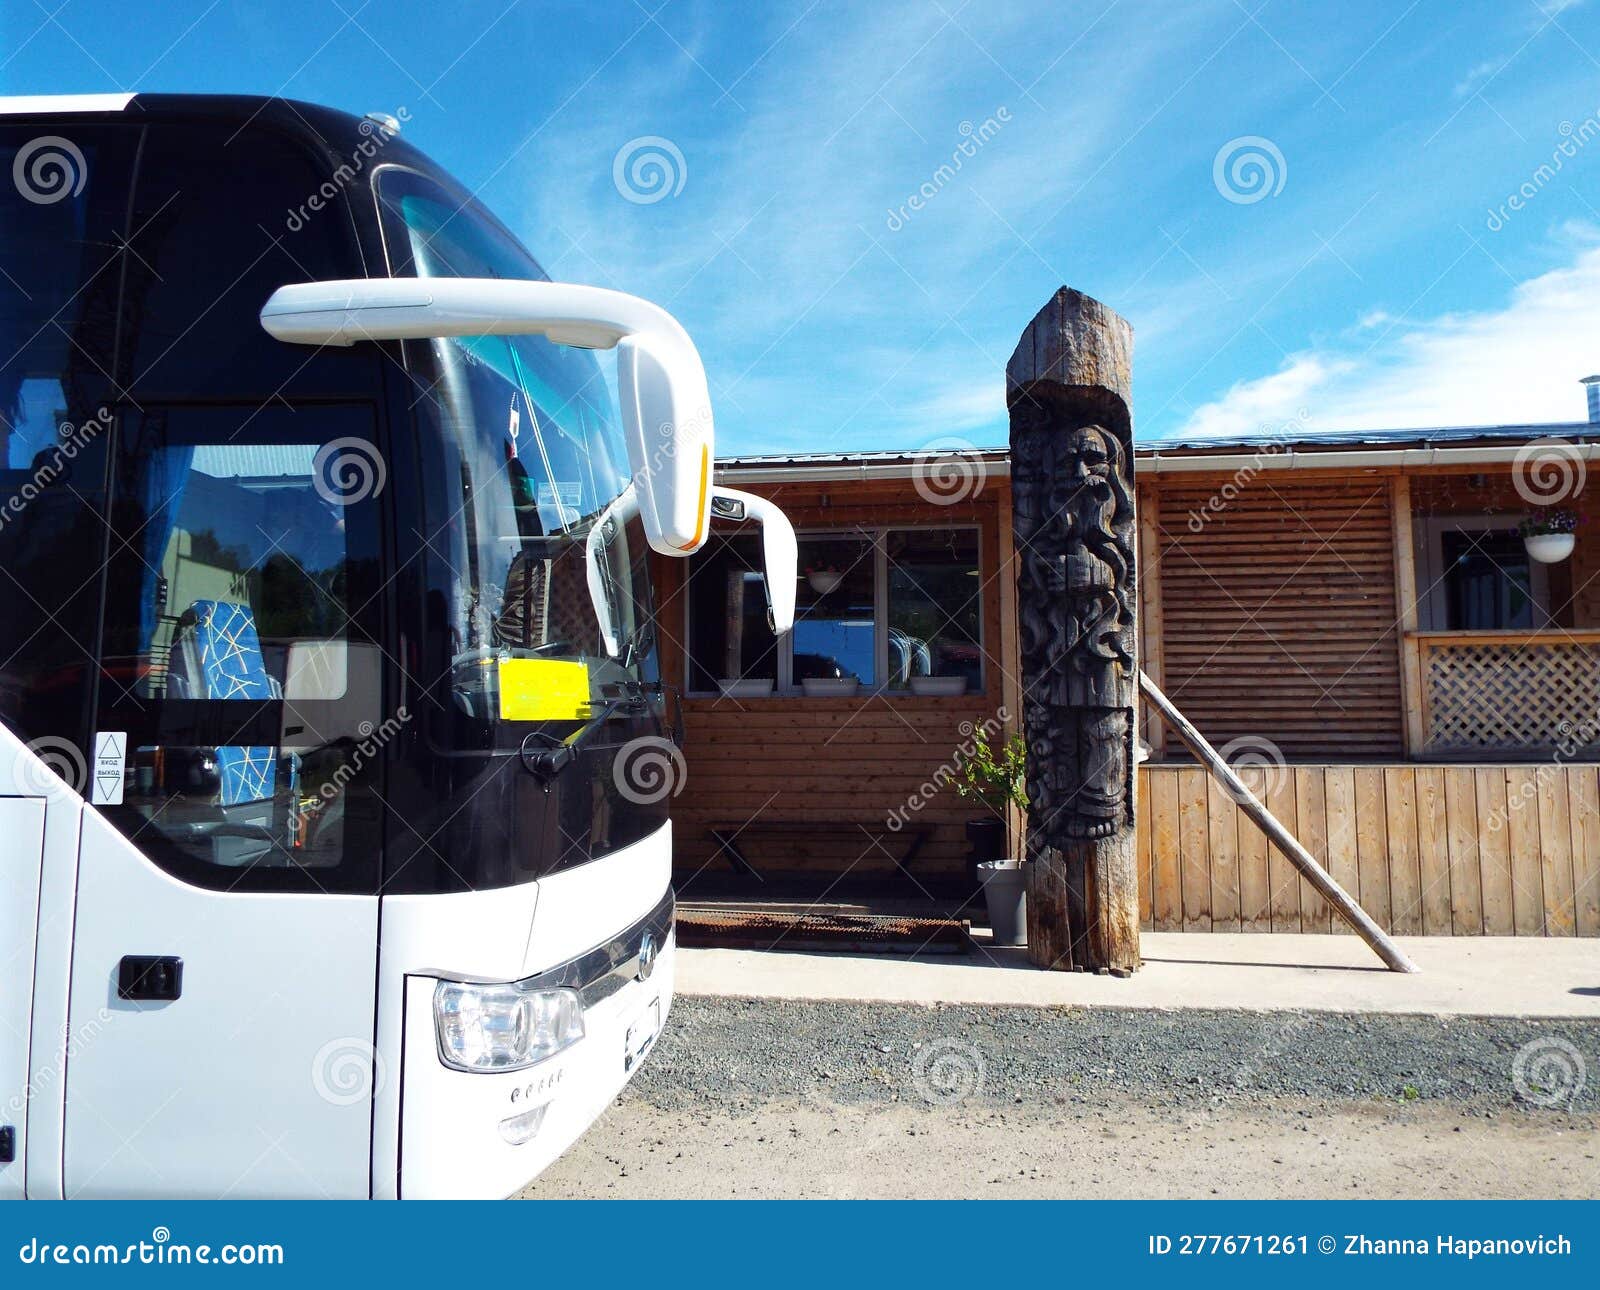 the front of the tourist bus against the backdrop of blue skies and local exoticism